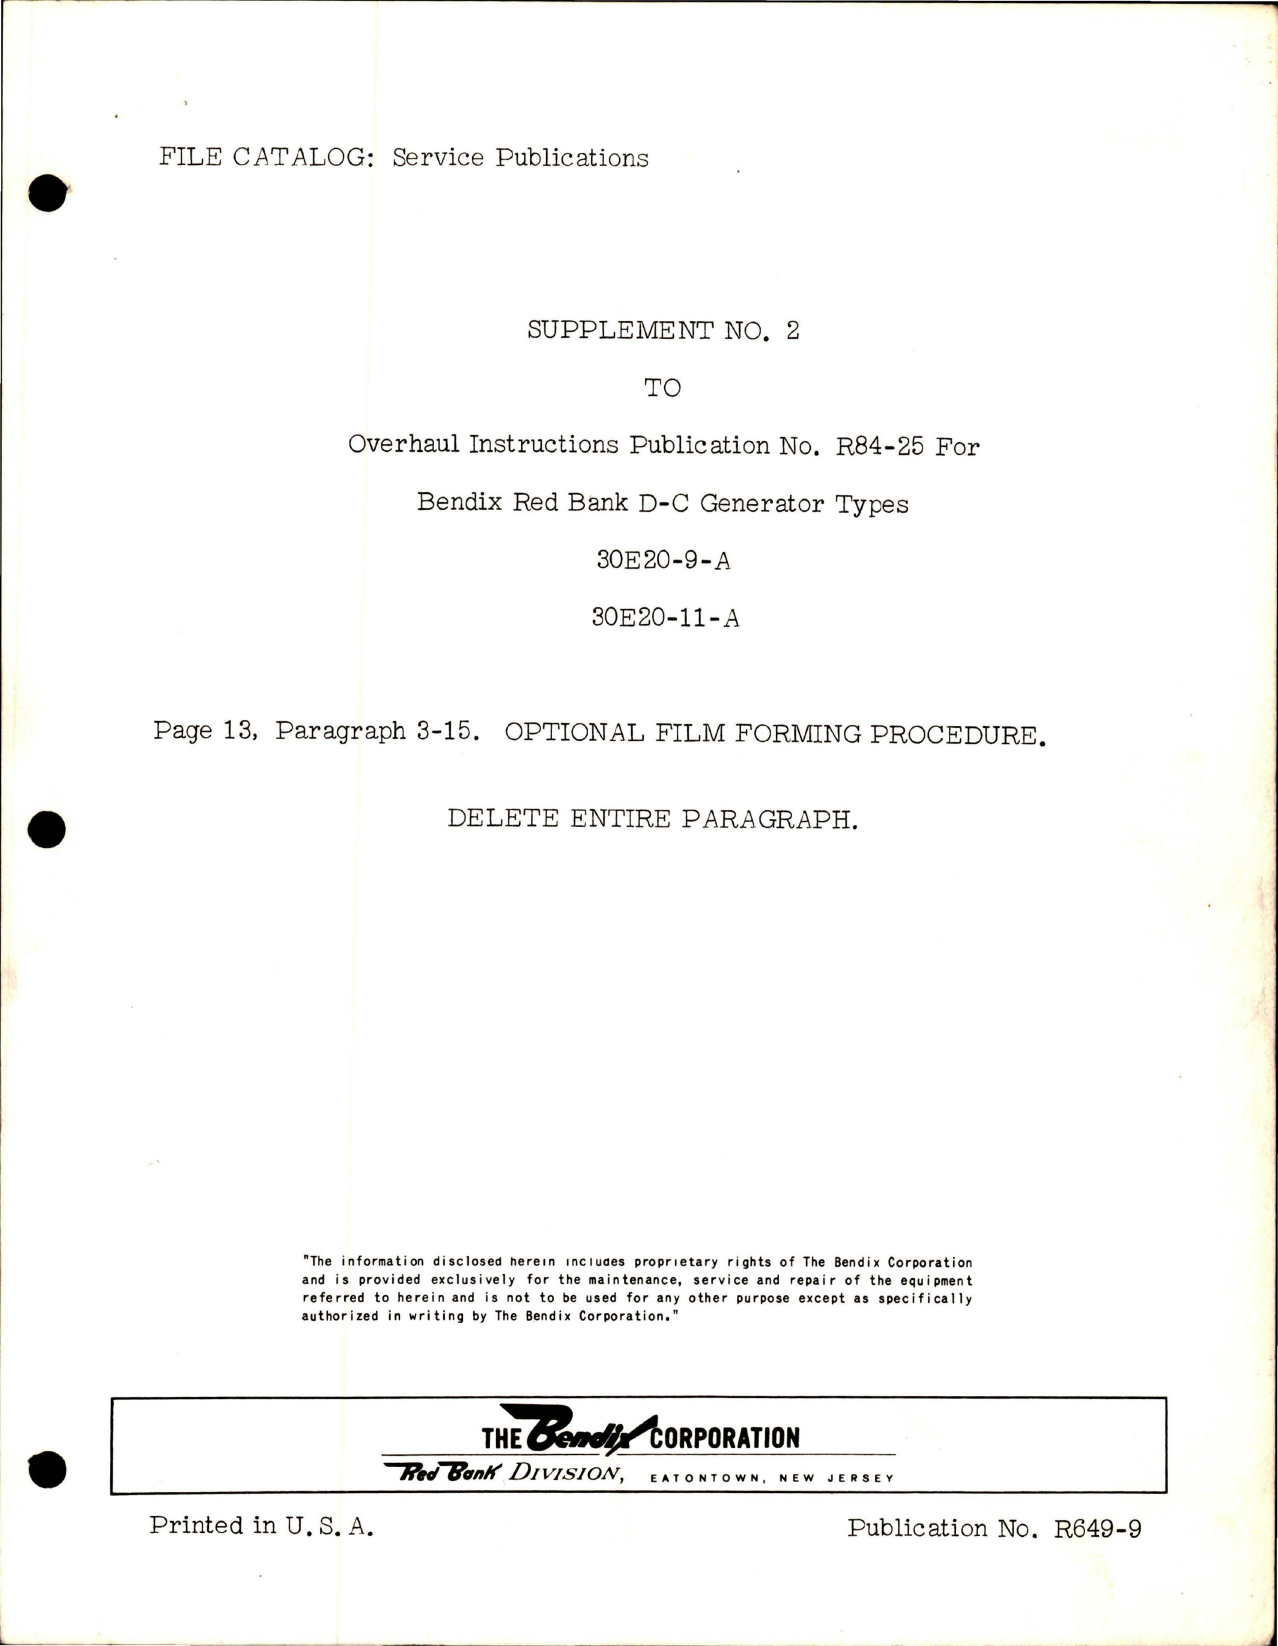 Sample page 1 from AirCorps Library document: Overhaul Instructions (Publication No. R84-25) for Bendix Red Bank D-C Generator - Type 30E20-9-A and 30E20-11-A